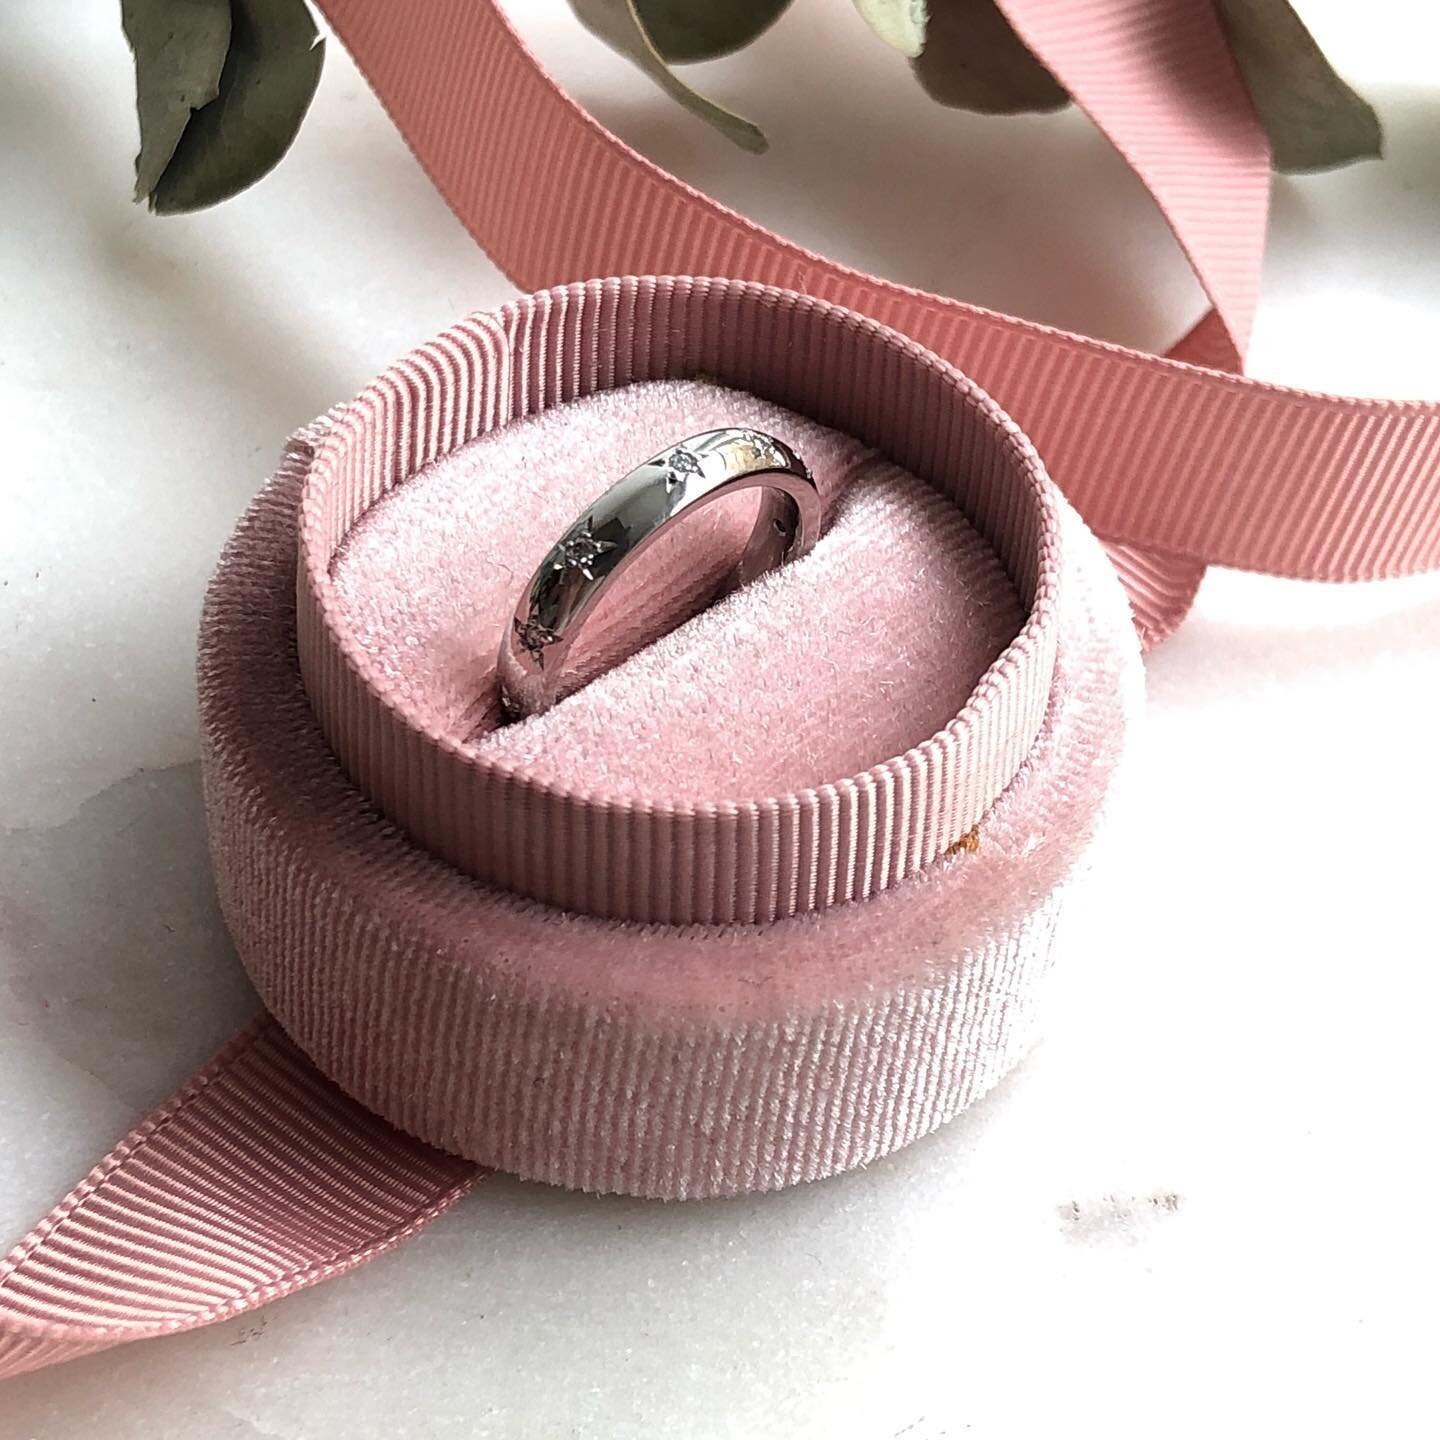 I was given the honour of making wedding rings for one of my oldest friends, who then become family.
@sharon_alison_young and Pip it made me so happy to watch you share your vows with these rings.
They suit you both so much, my starry eyed Sharry and